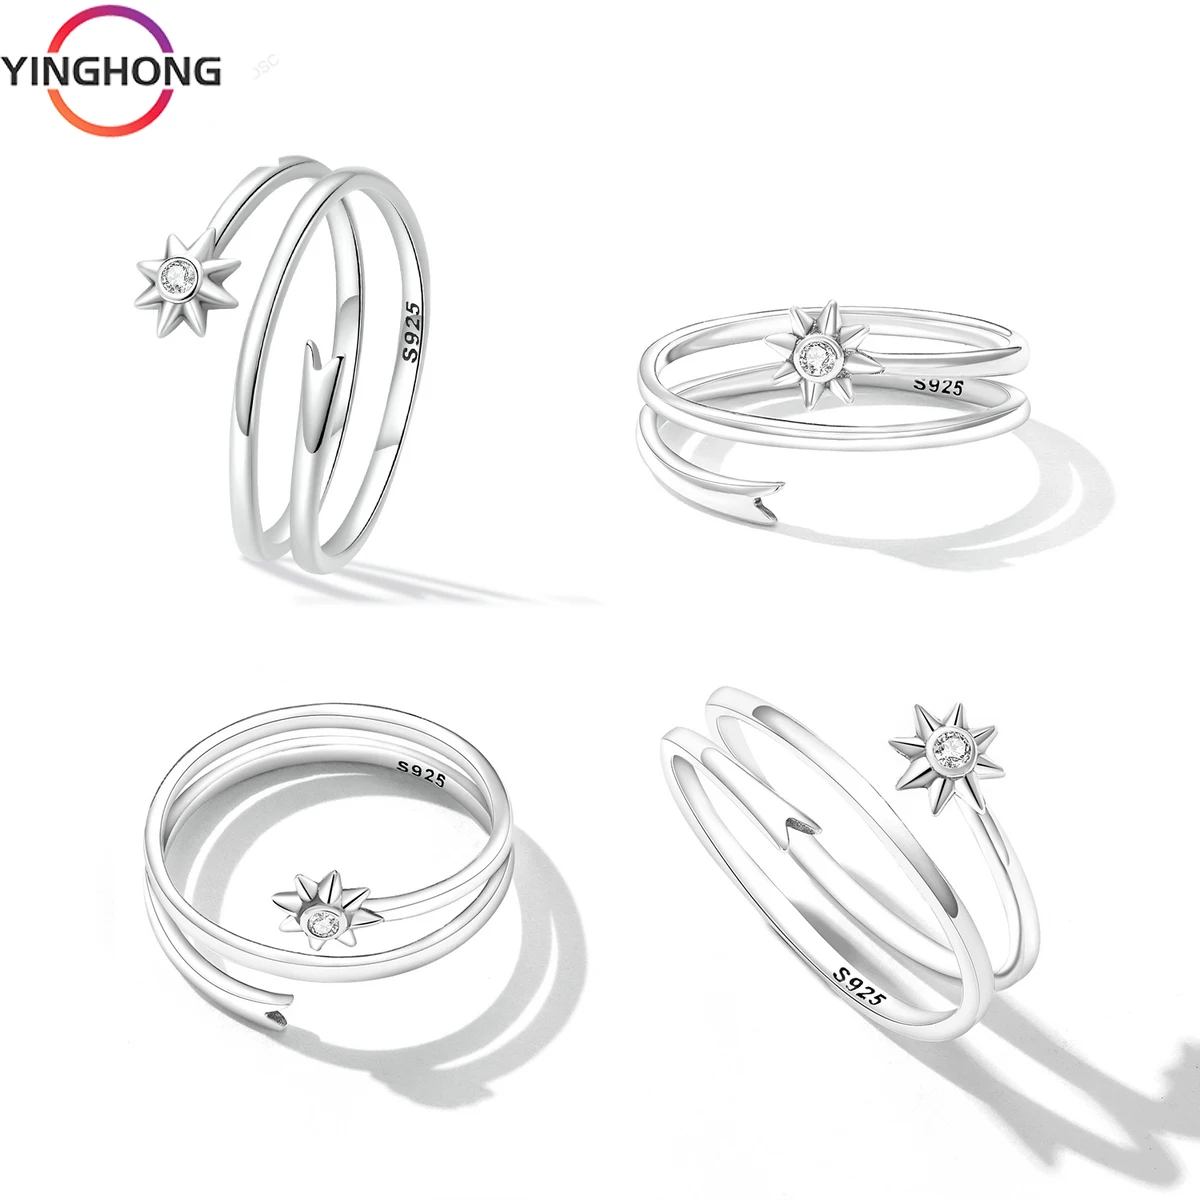 

2023 Spring New S925 Sterling Silver Wishing Meteor Lady Ring Fashion Temperament Charm Luxury DIY Exquisite Jewelry Gift